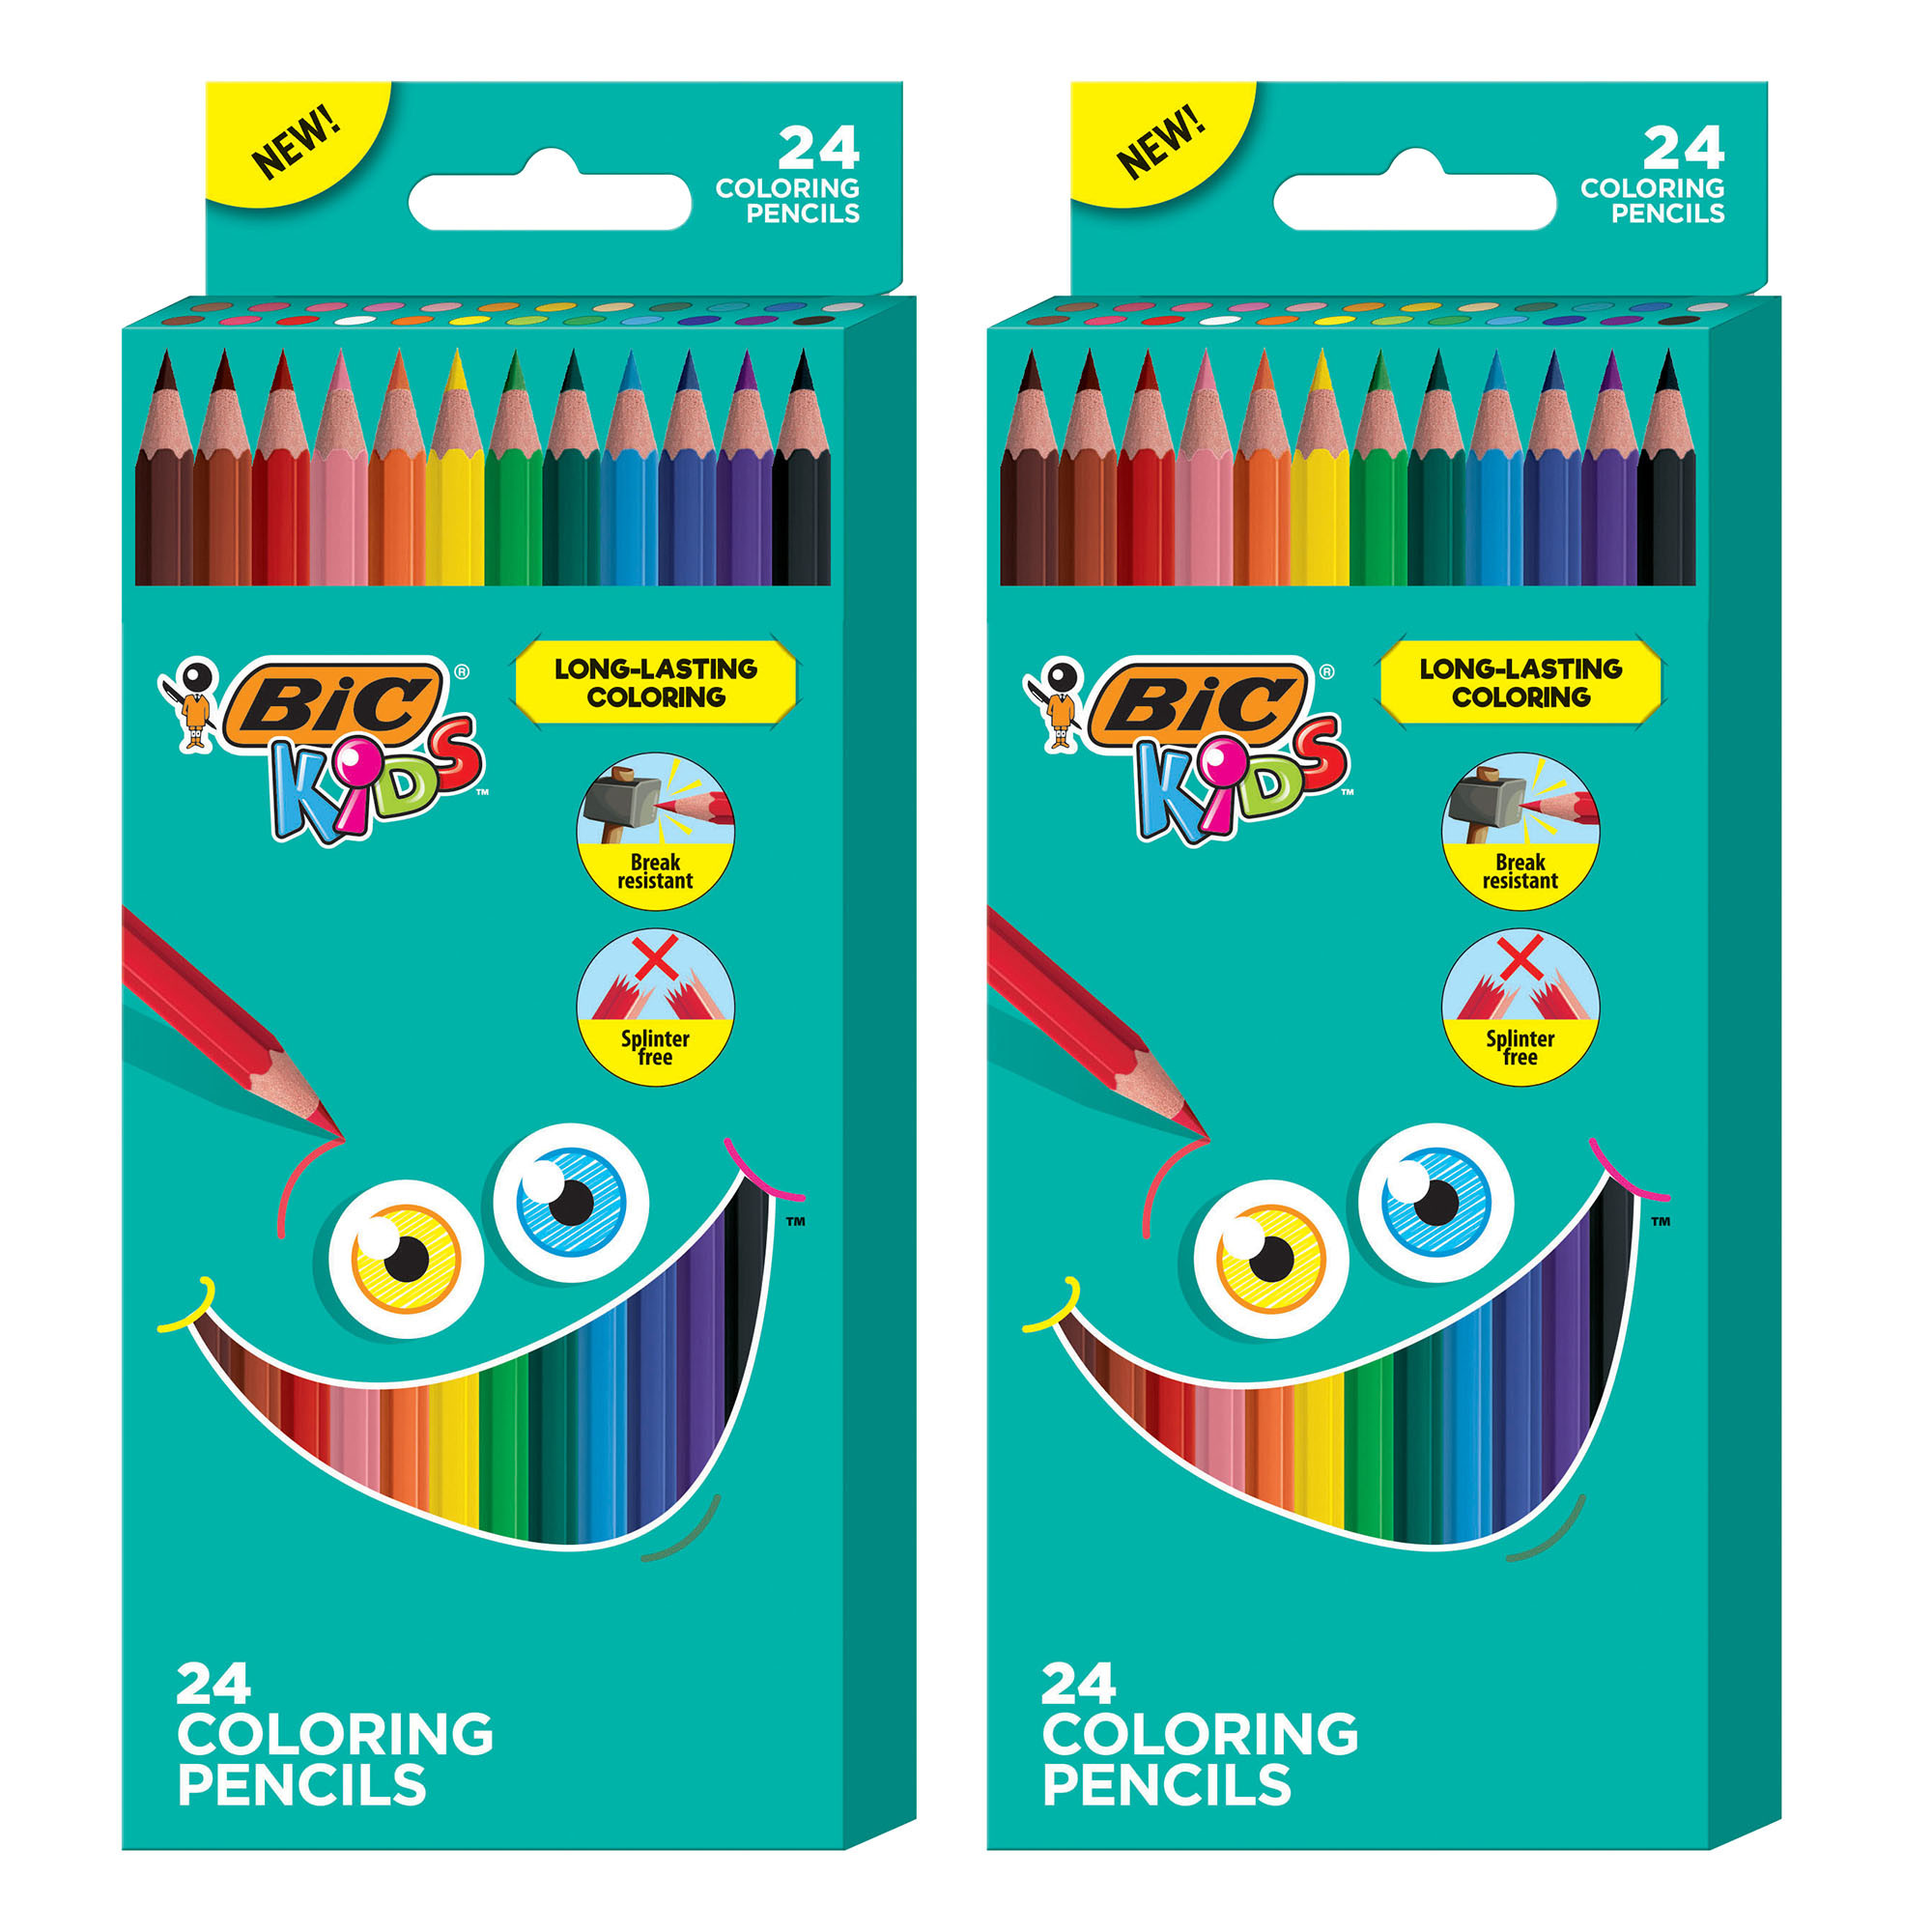 BIC Kids Coloring Pencils, Assorted Colors, 2 Packs of 24 Colored Pencils - image 1 of 6